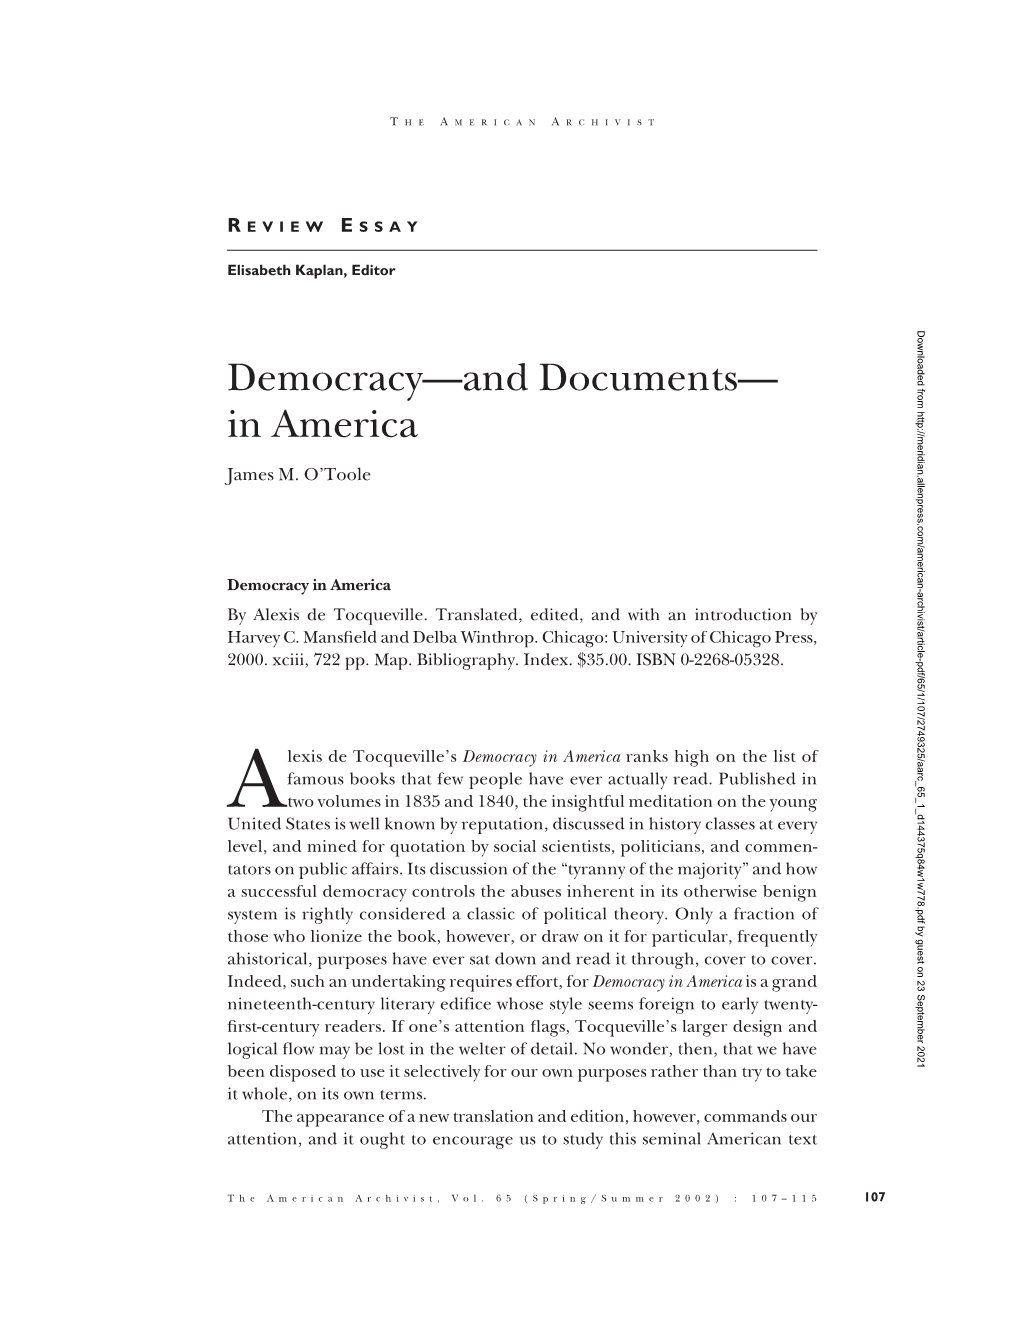 Democracy—And Documents— in America